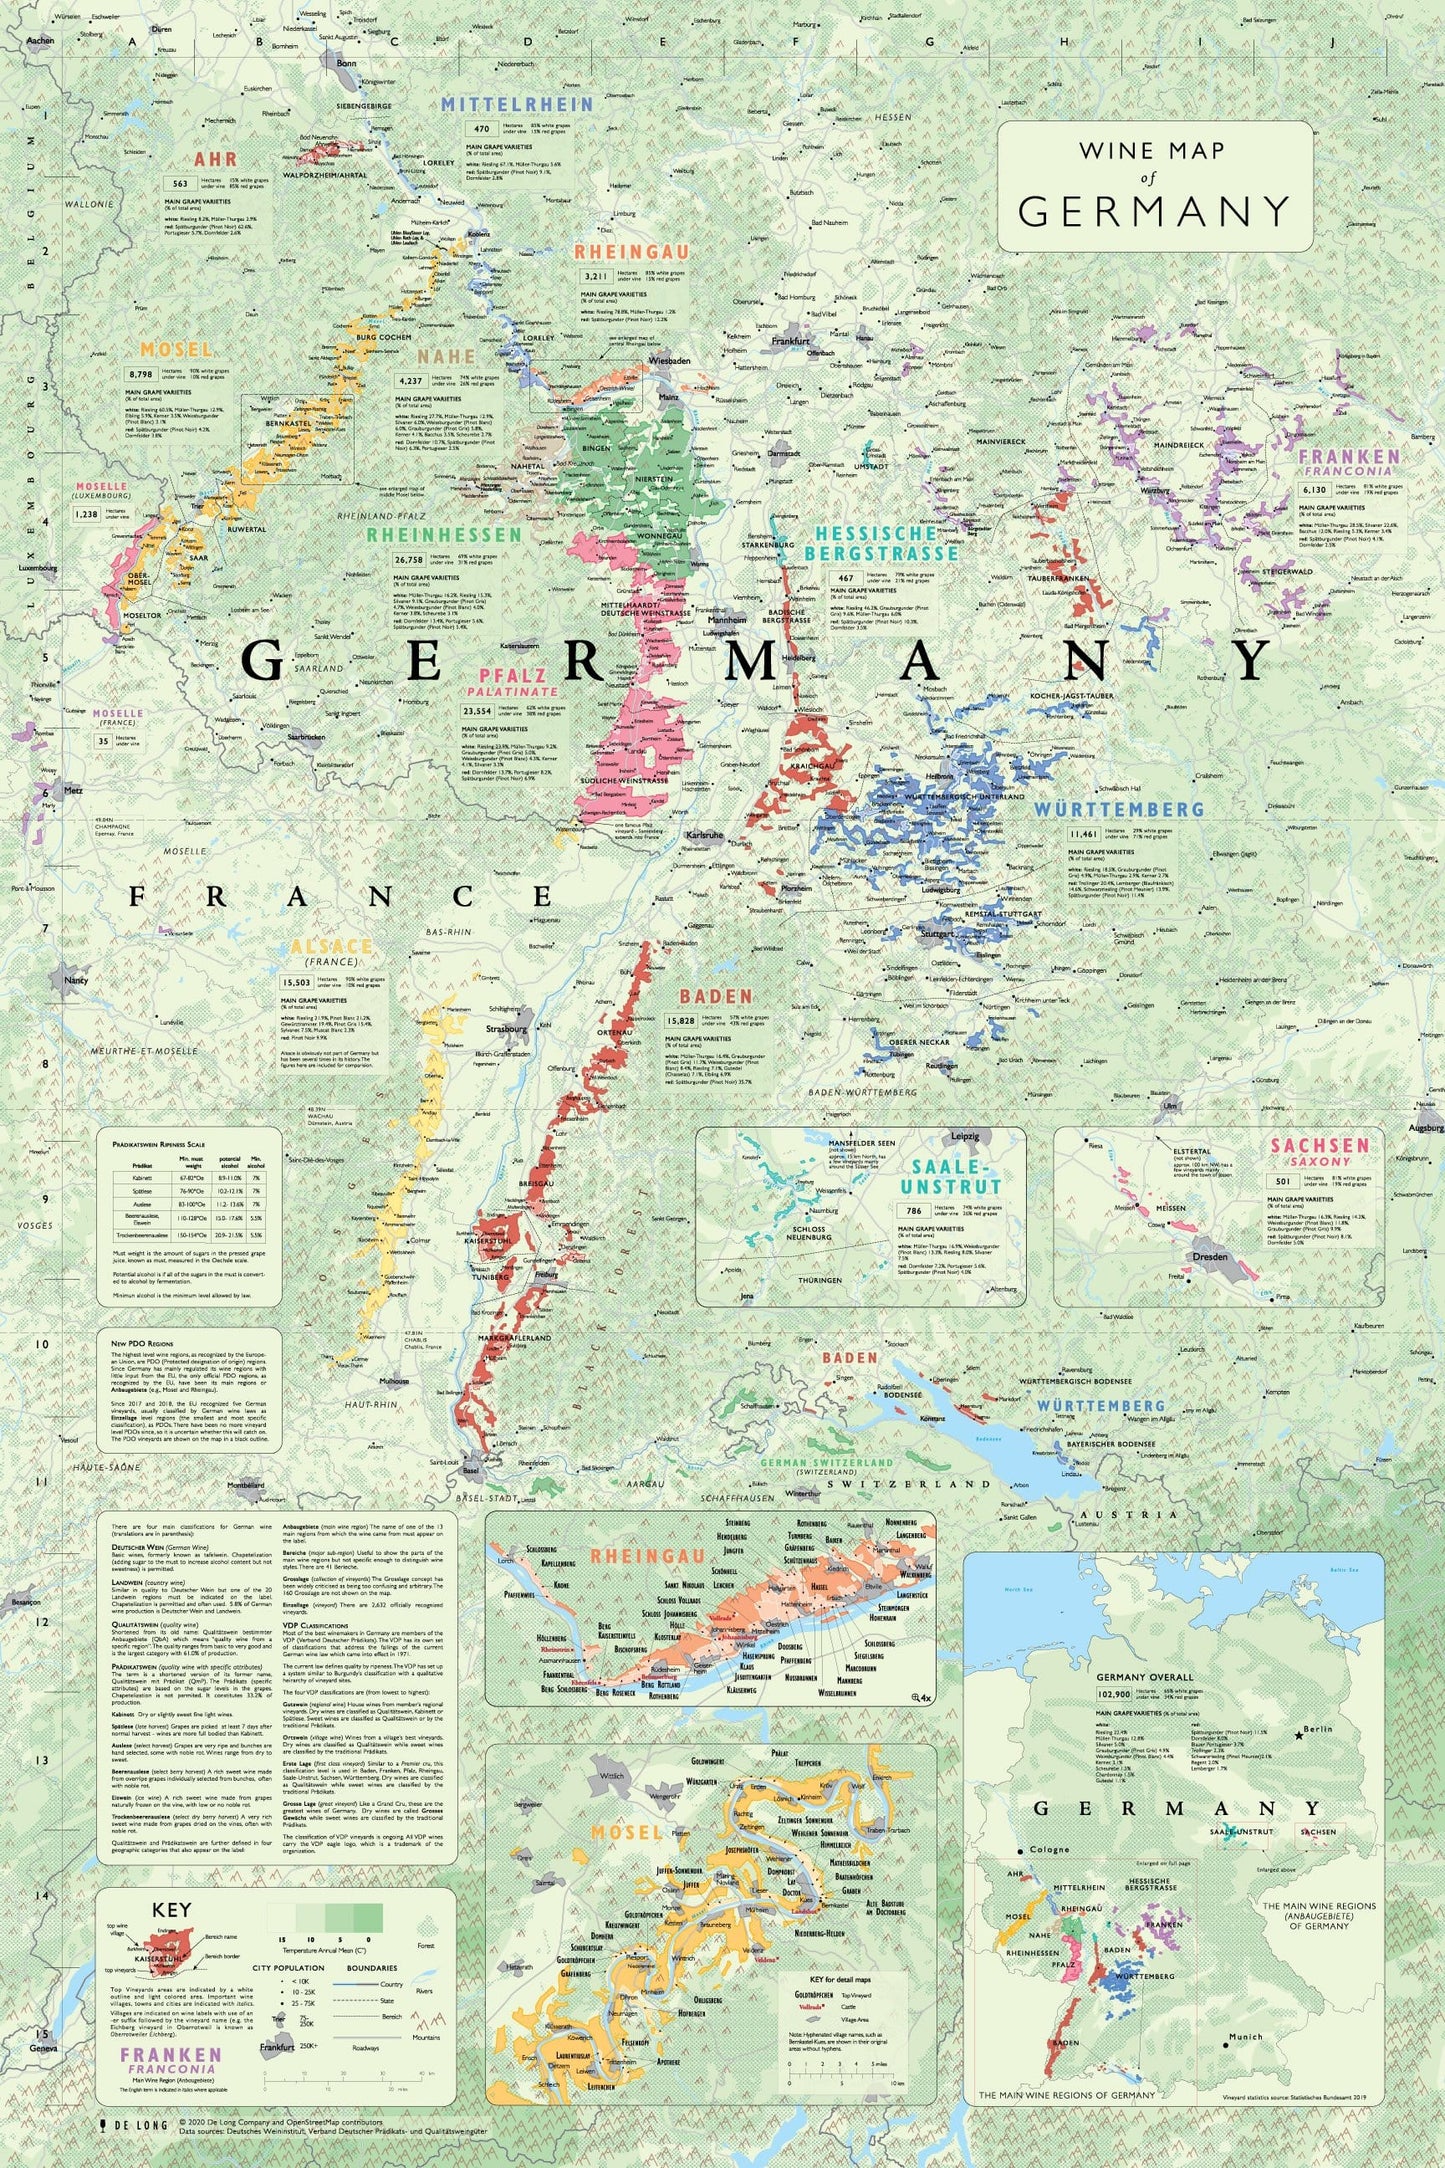 Wine Map of Germany